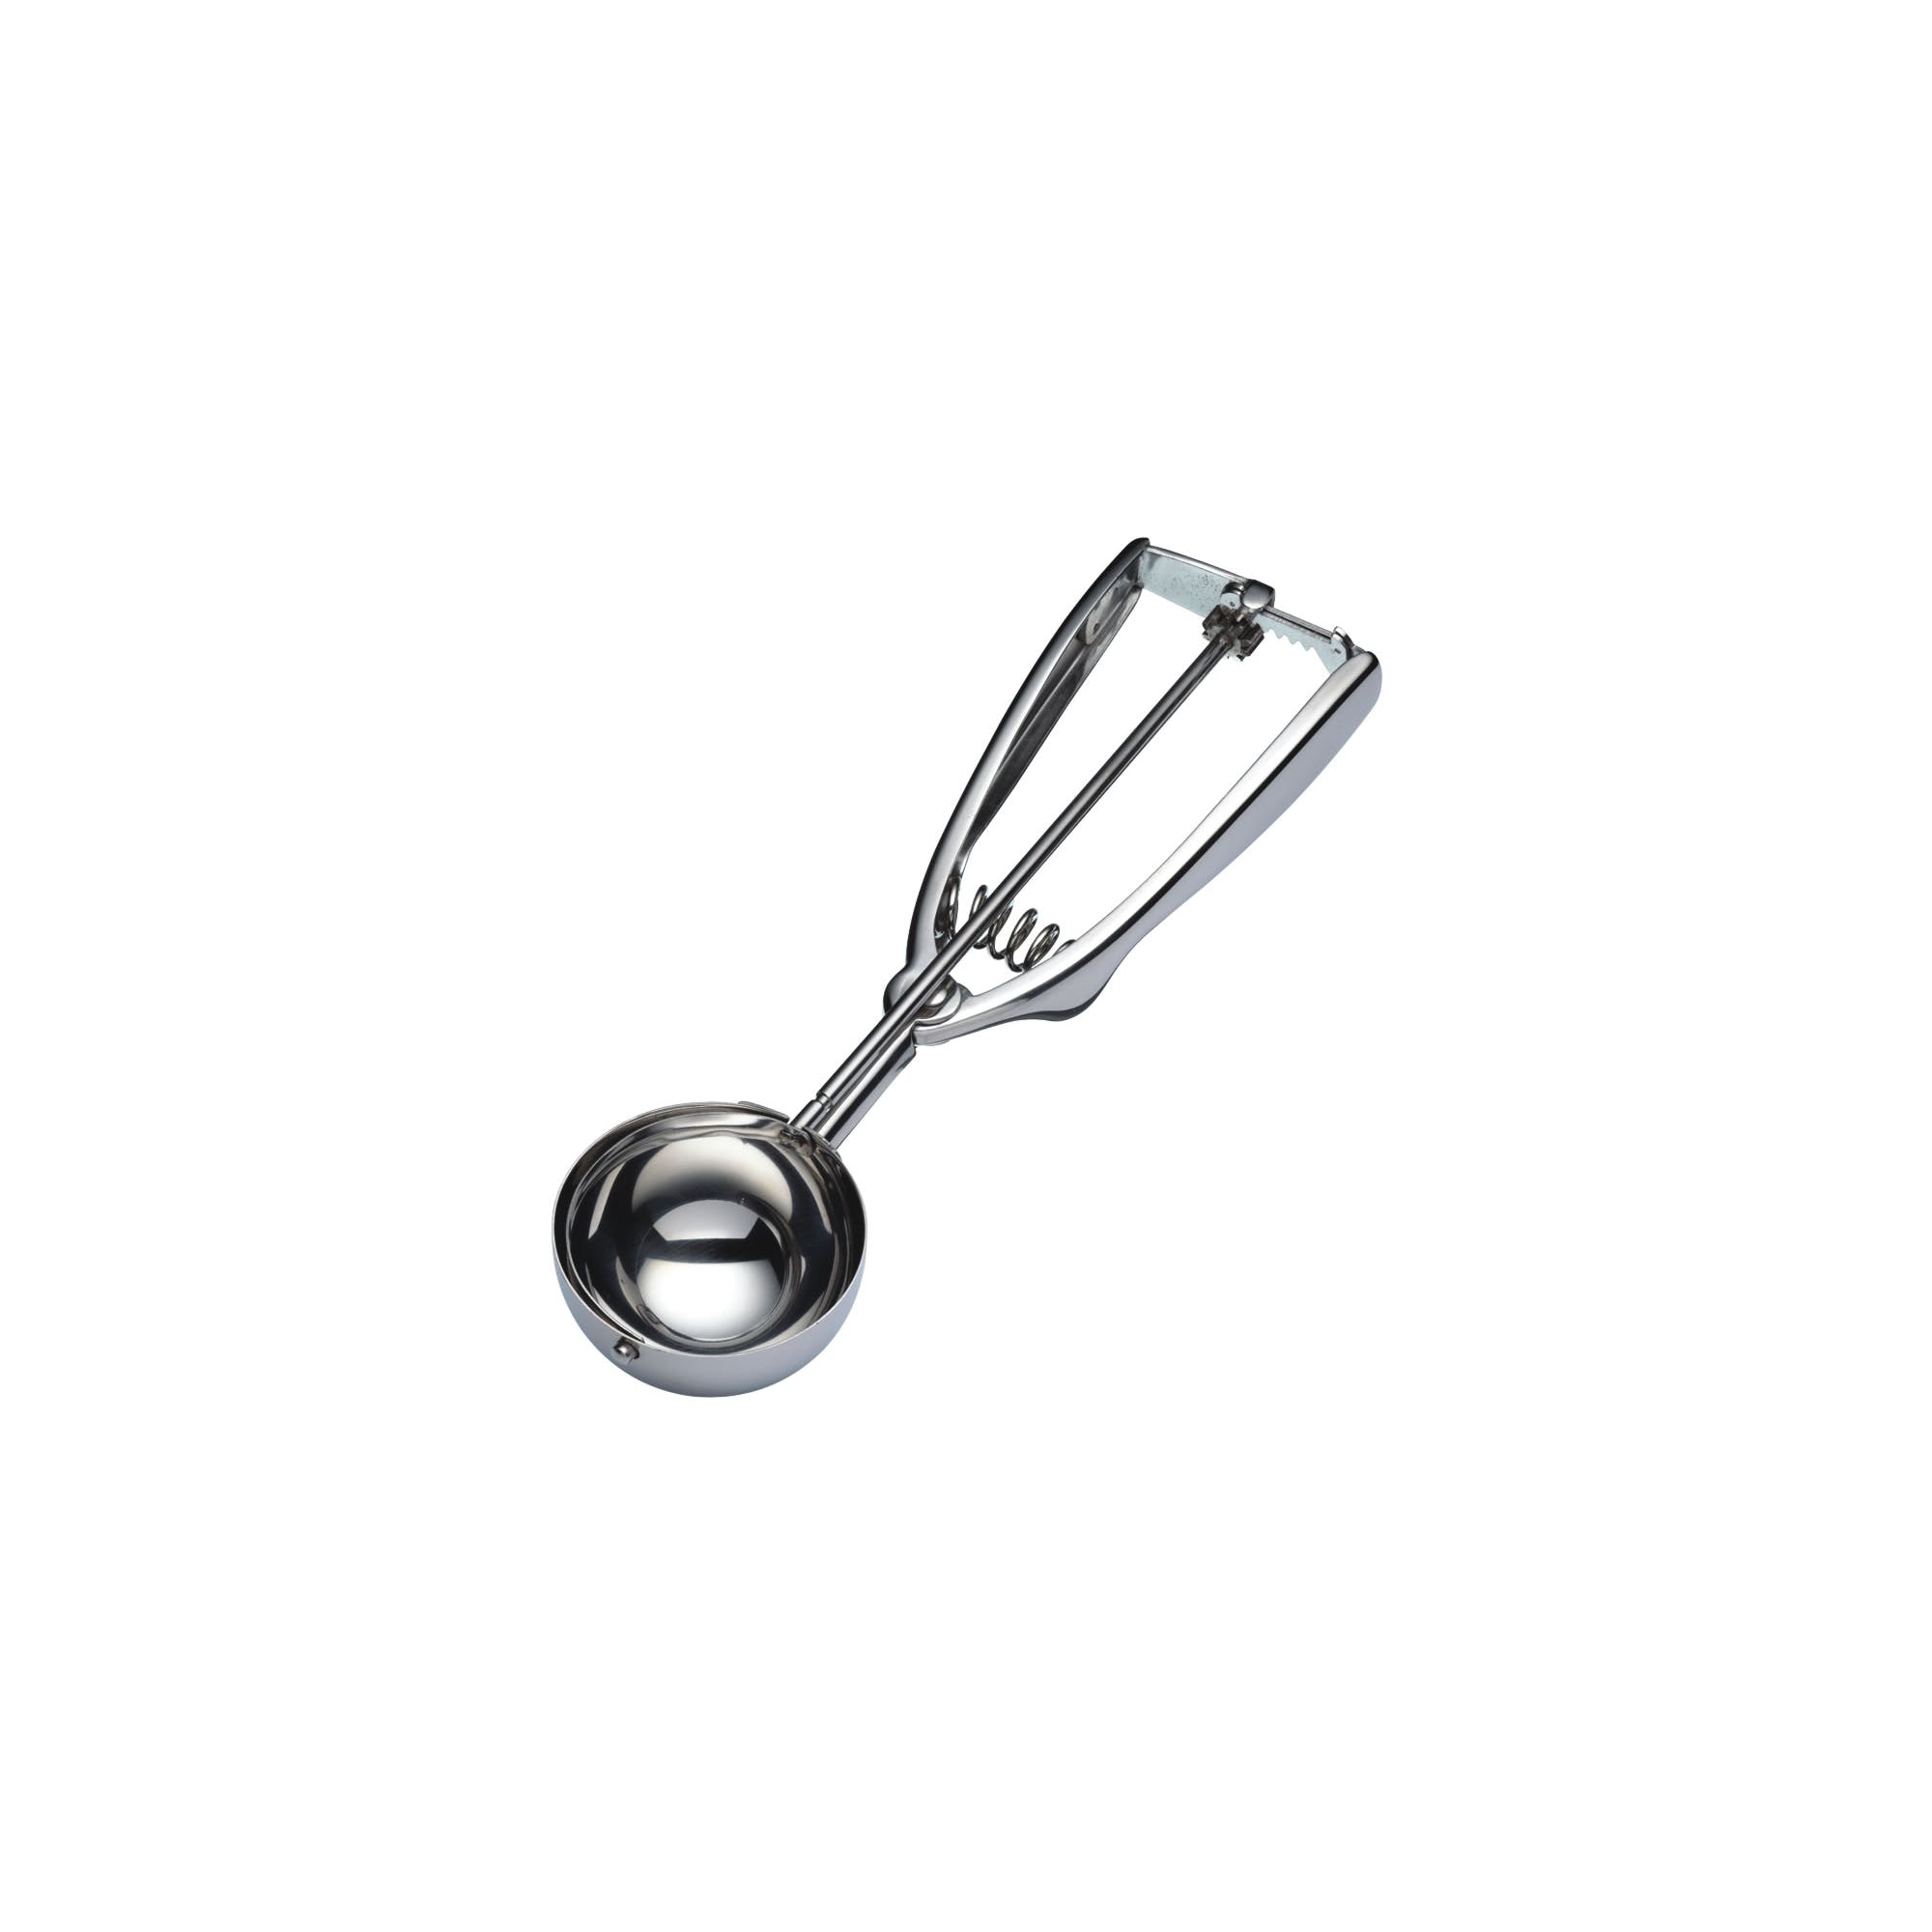 KitchenCraft Deluxe Stainless Steel 5.6cm (56mm) Ice Cream Scoop - The Cooks Cupboard Ltd